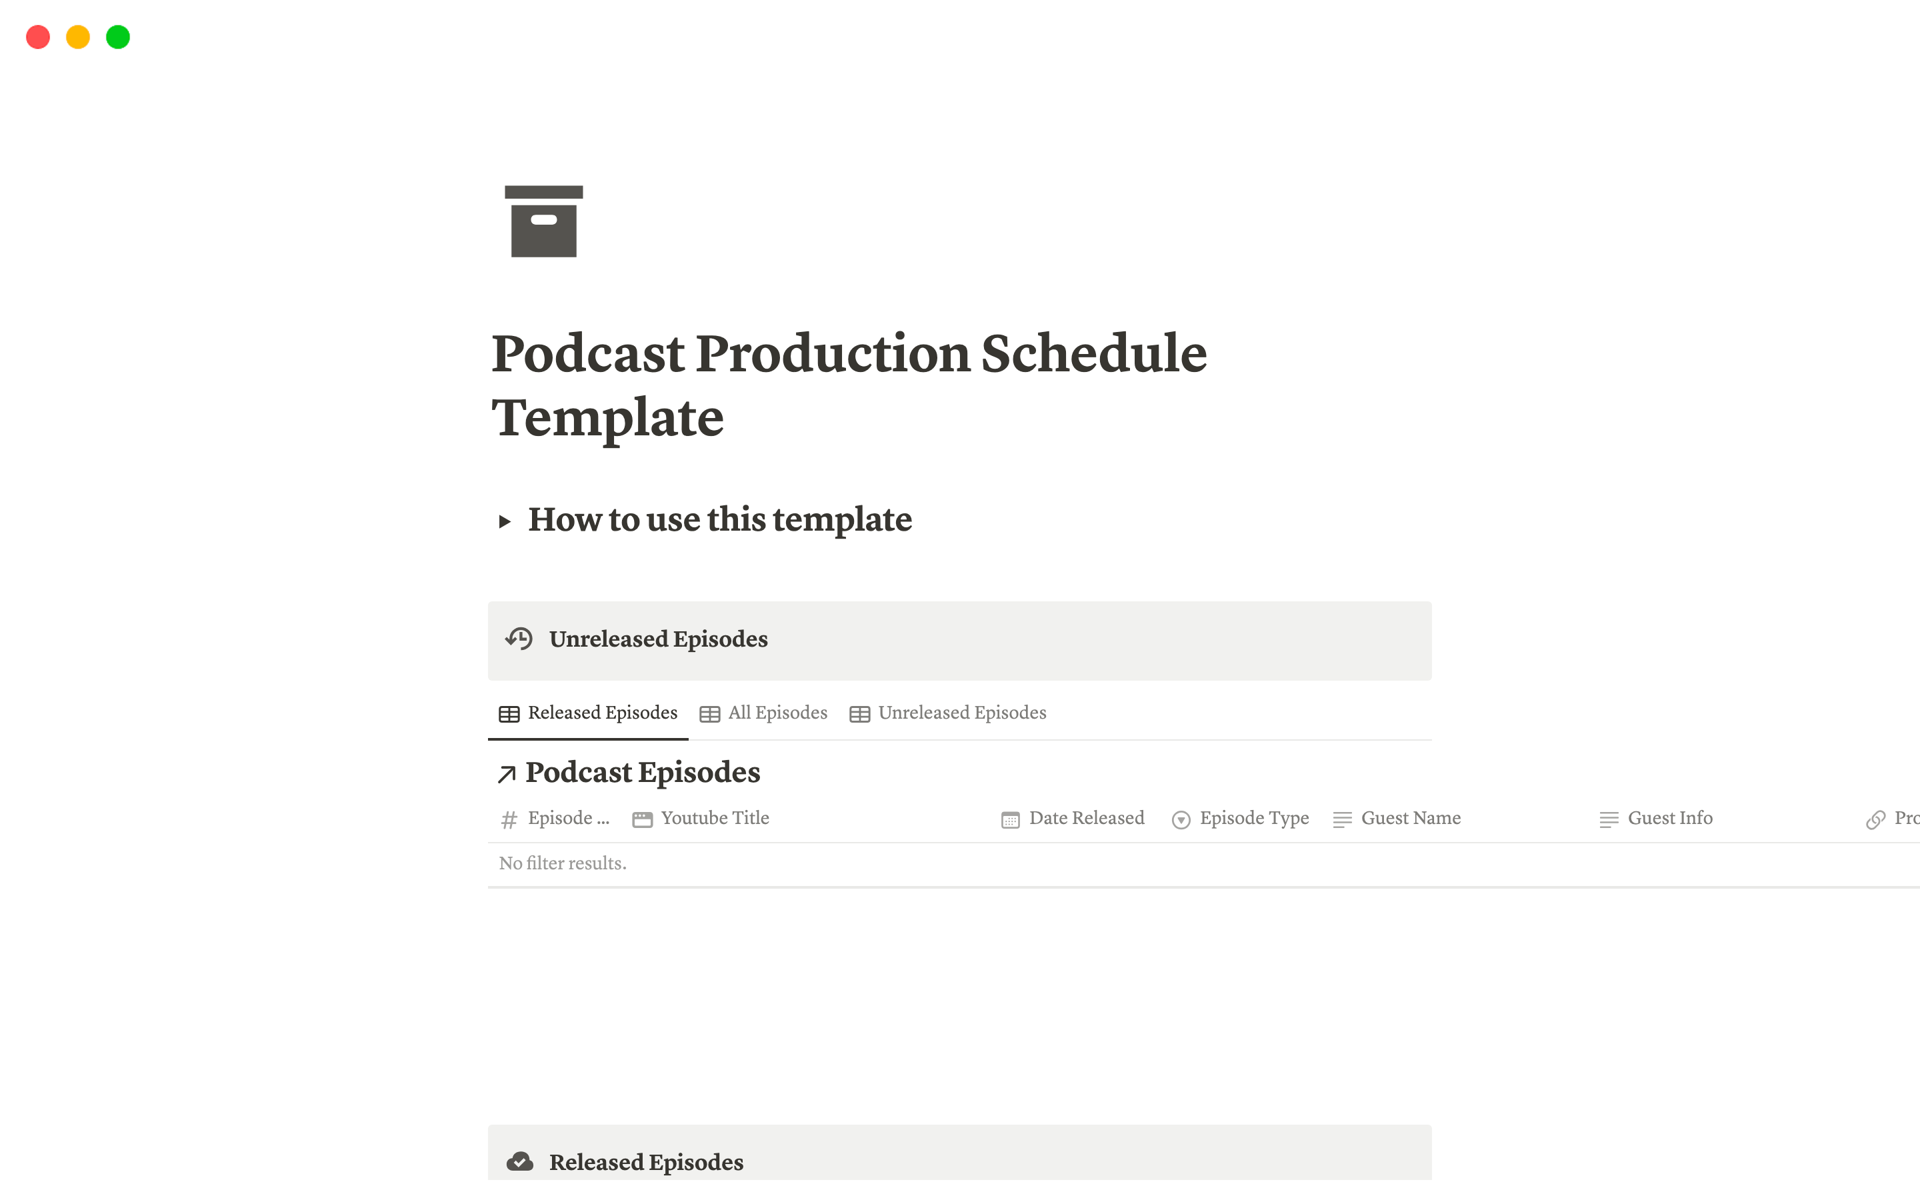 Podcast Production Schedule Templateのテンプレートのプレビュー